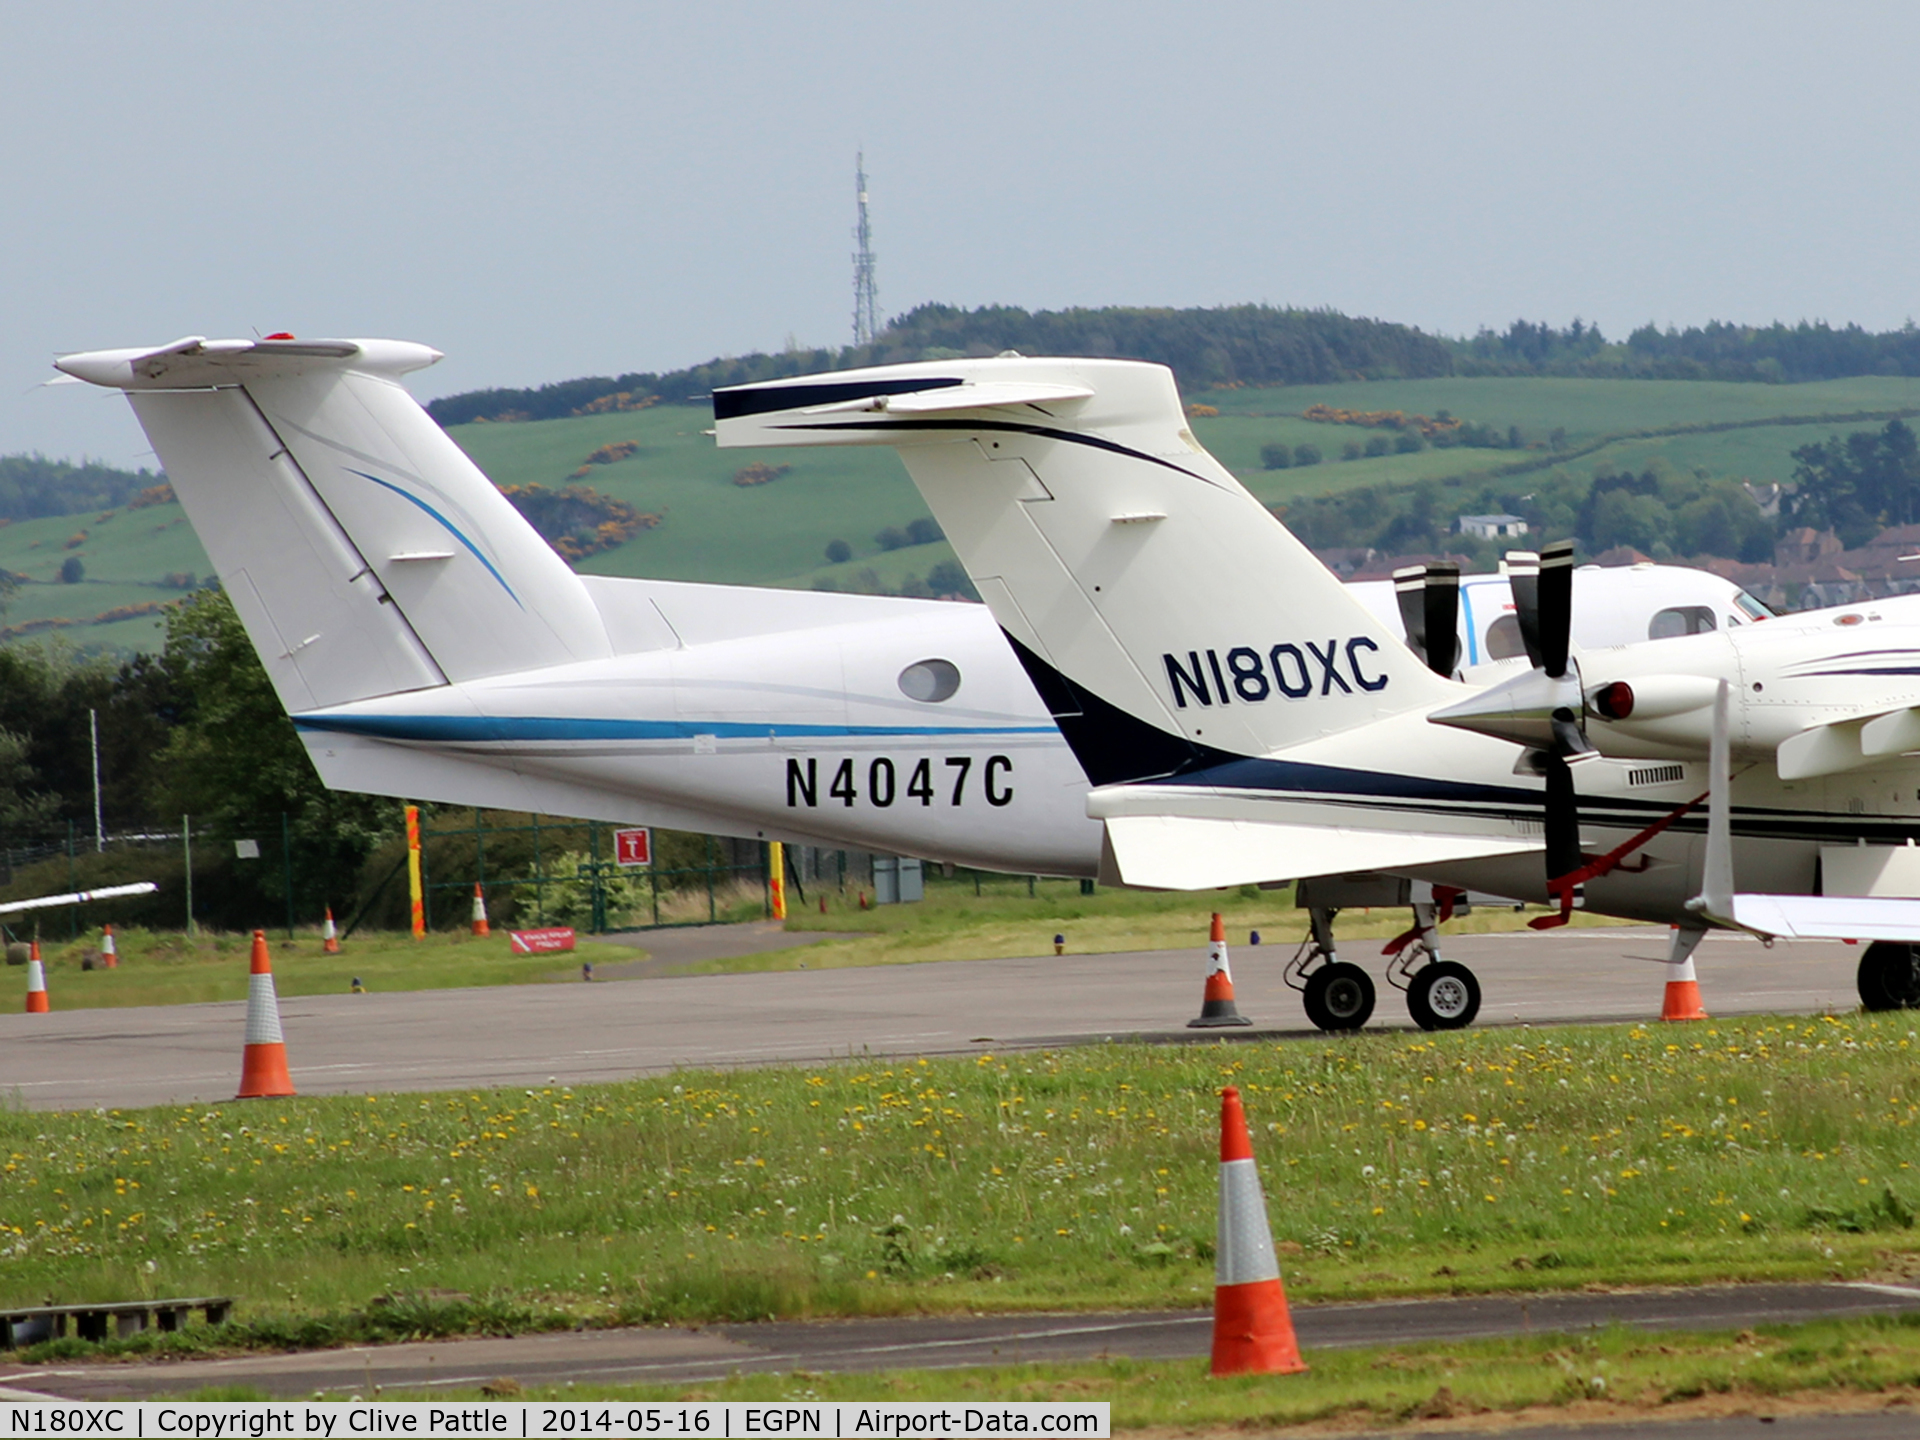 N180XC, 2001 Piaggio P-180 Avanti C/N 1051, The apron can get busy especially when there are Golf Tounaments on at the nearby St Andrews Golf Links